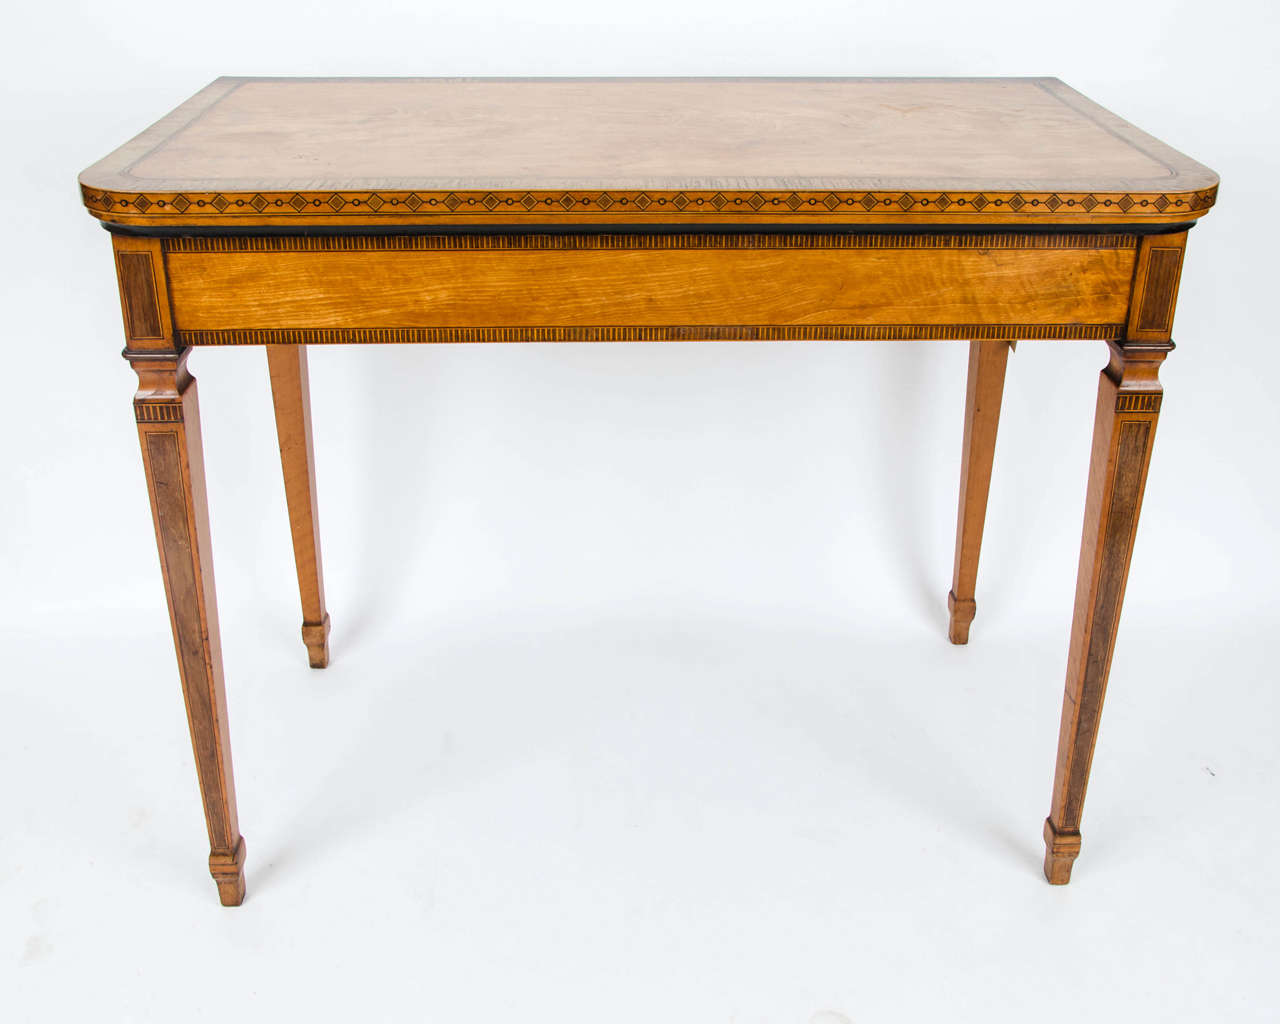 A George III Satinwood, Indian Rosewood-crossbanded  and amaranth inlaid card table with gate leg action and green baized interior.